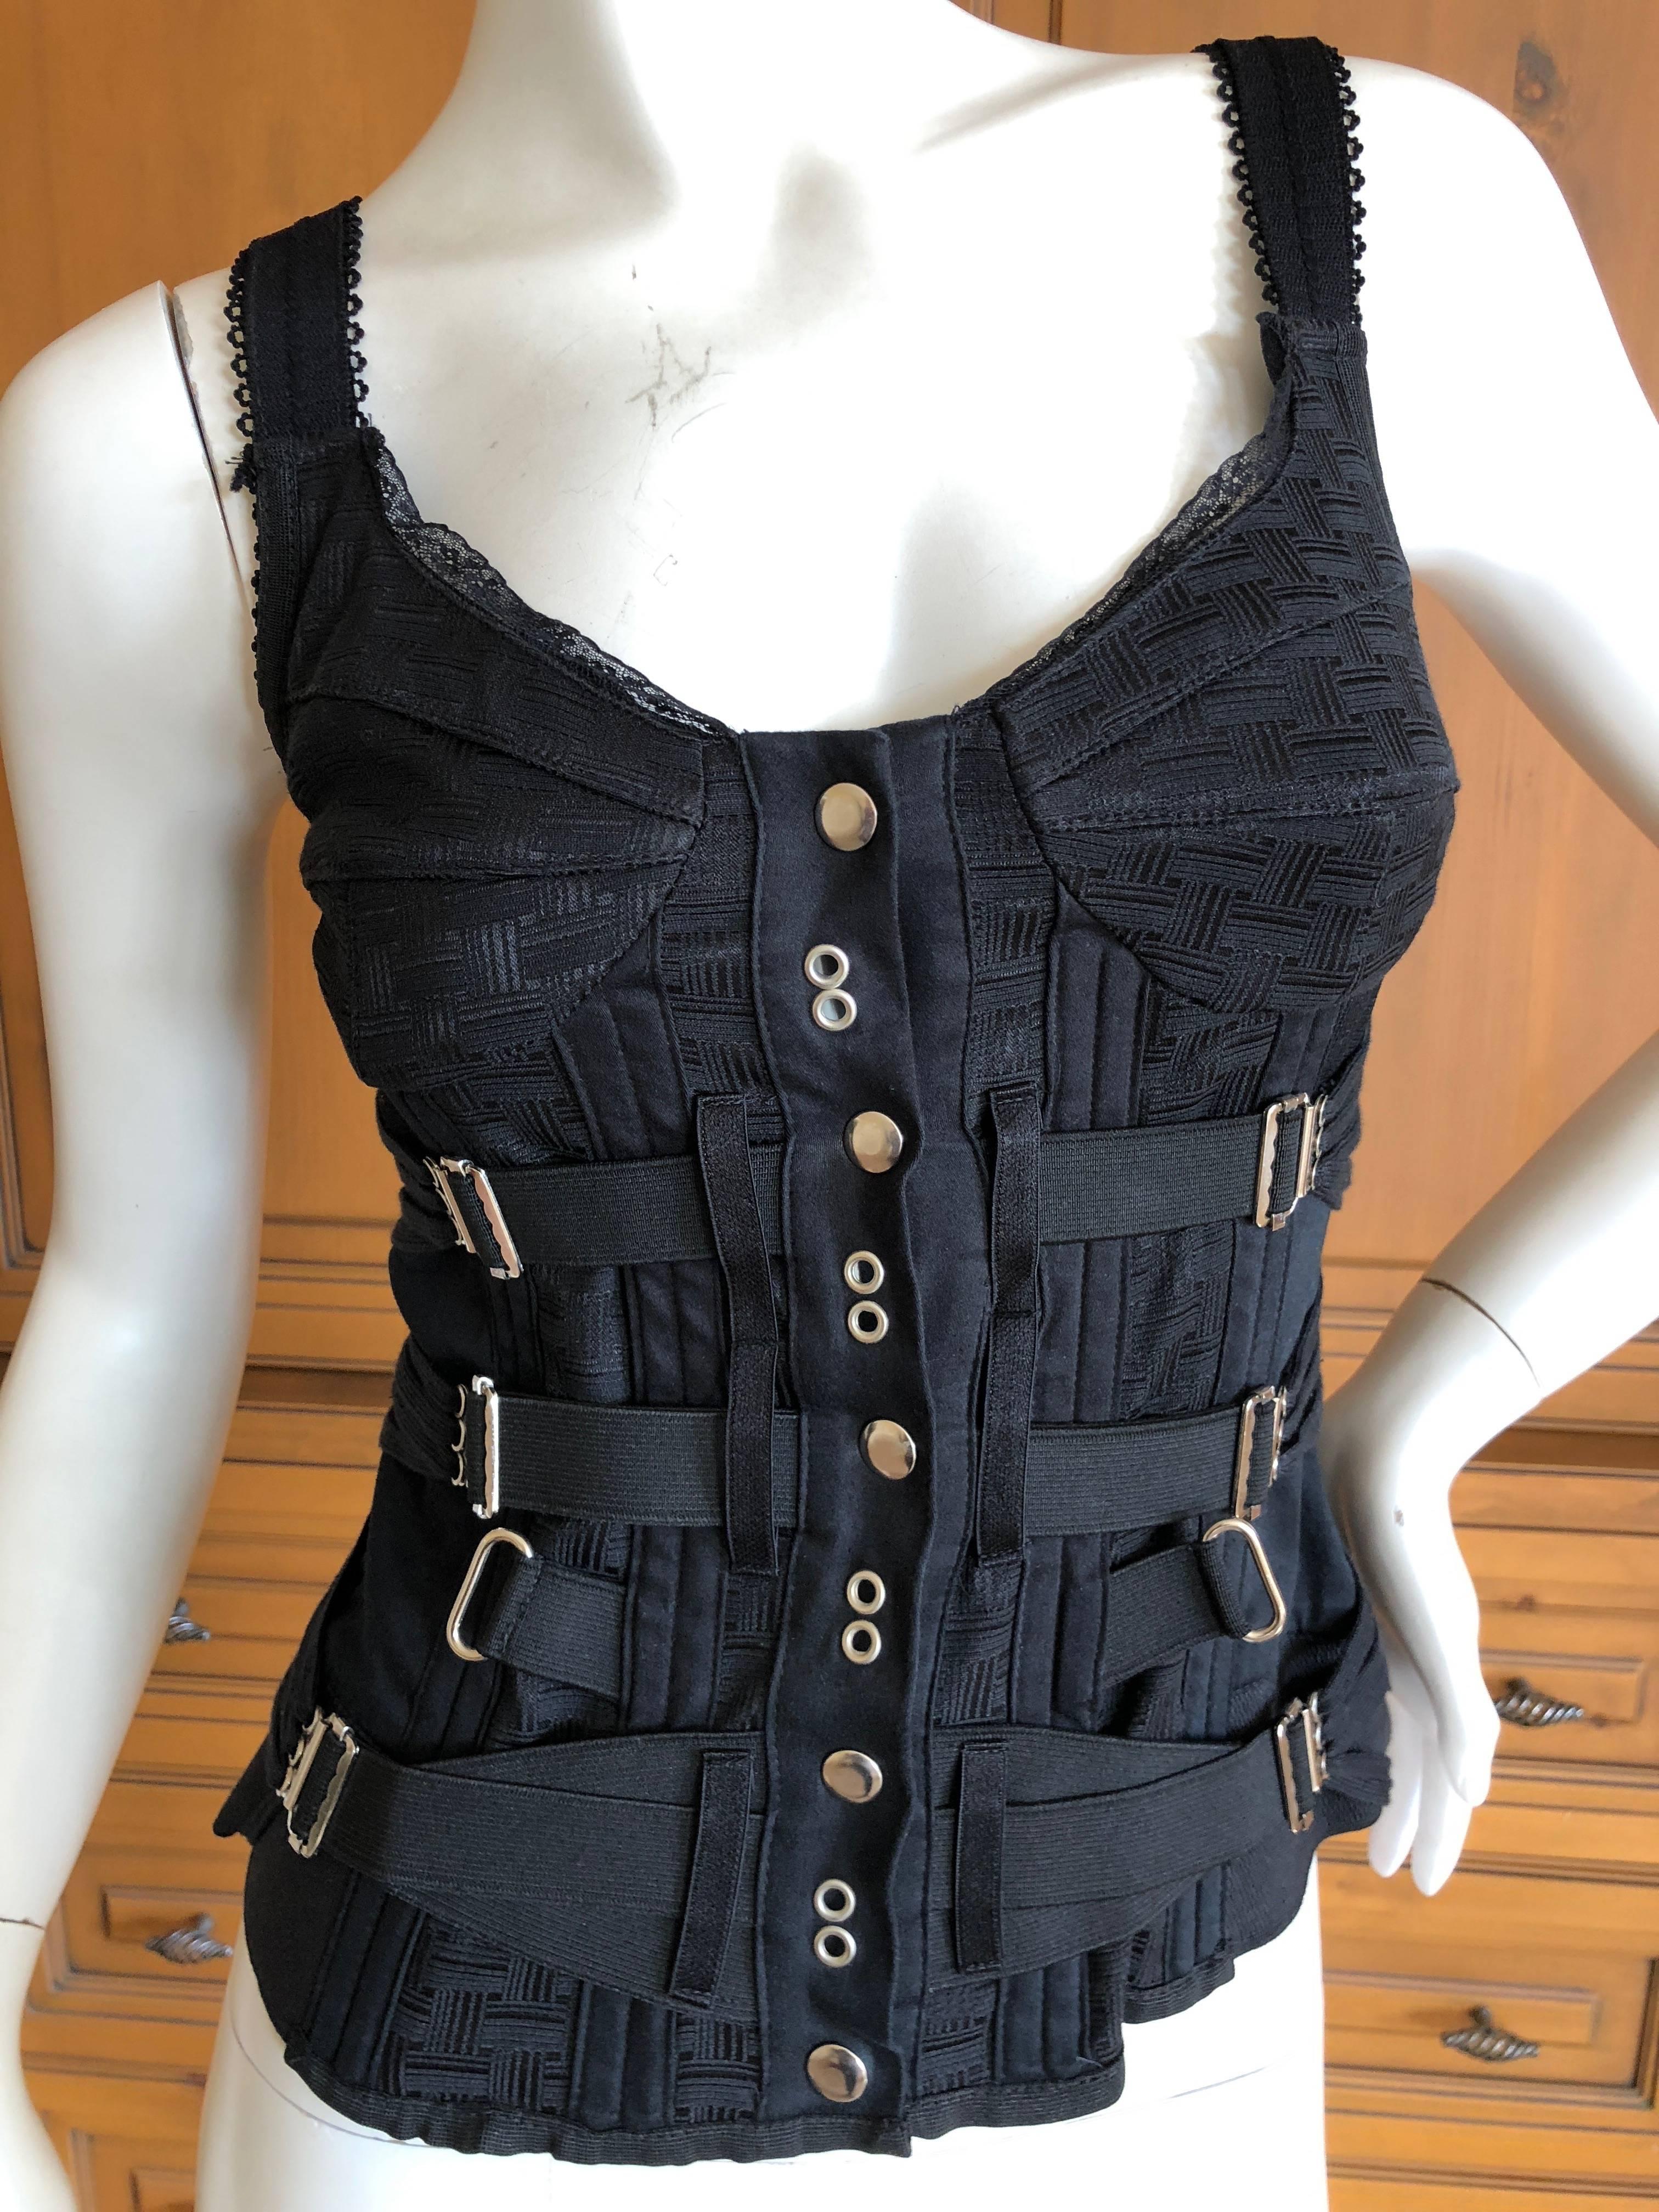 Dolce & Gabbana D&G Vintage Black Bondage Strap Bustier Top
There is  a lot of stretch, it snaps up the front.
Size 42
Bust 34
 Waist 28